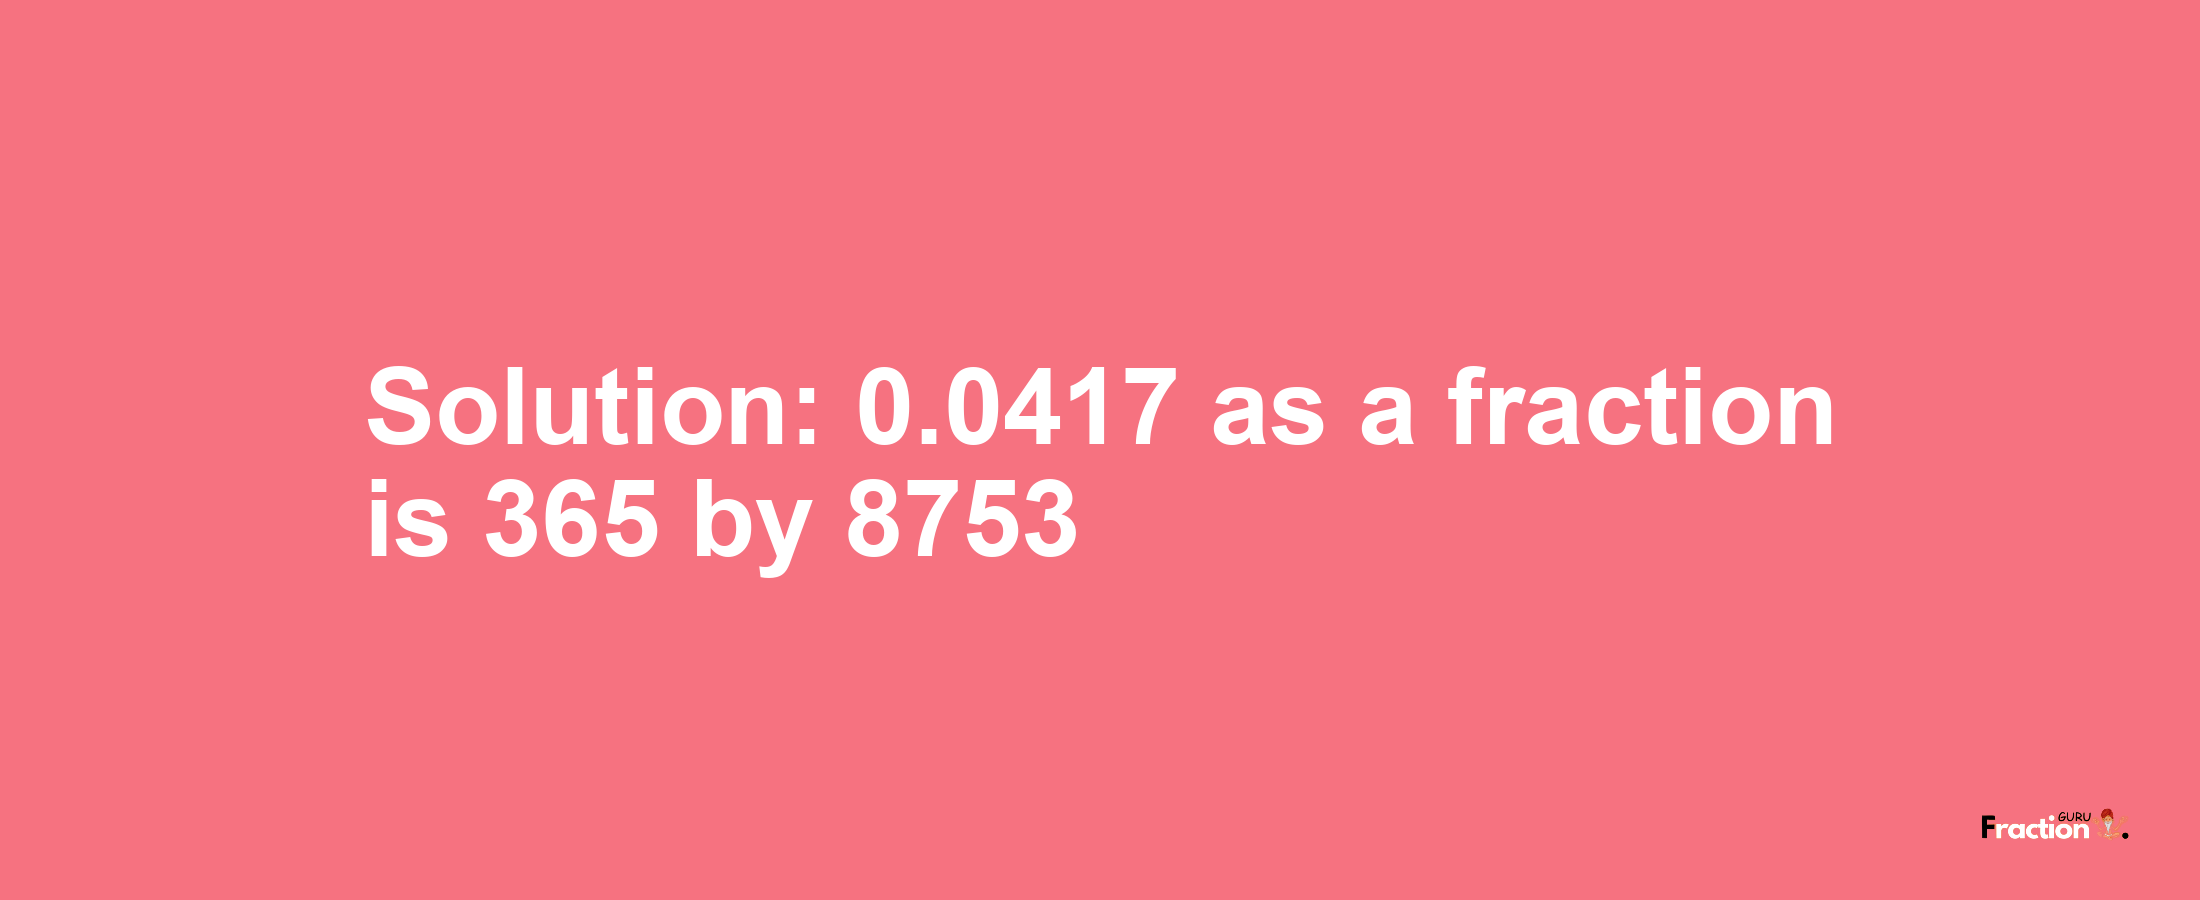 Solution:0.0417 as a fraction is 365/8753